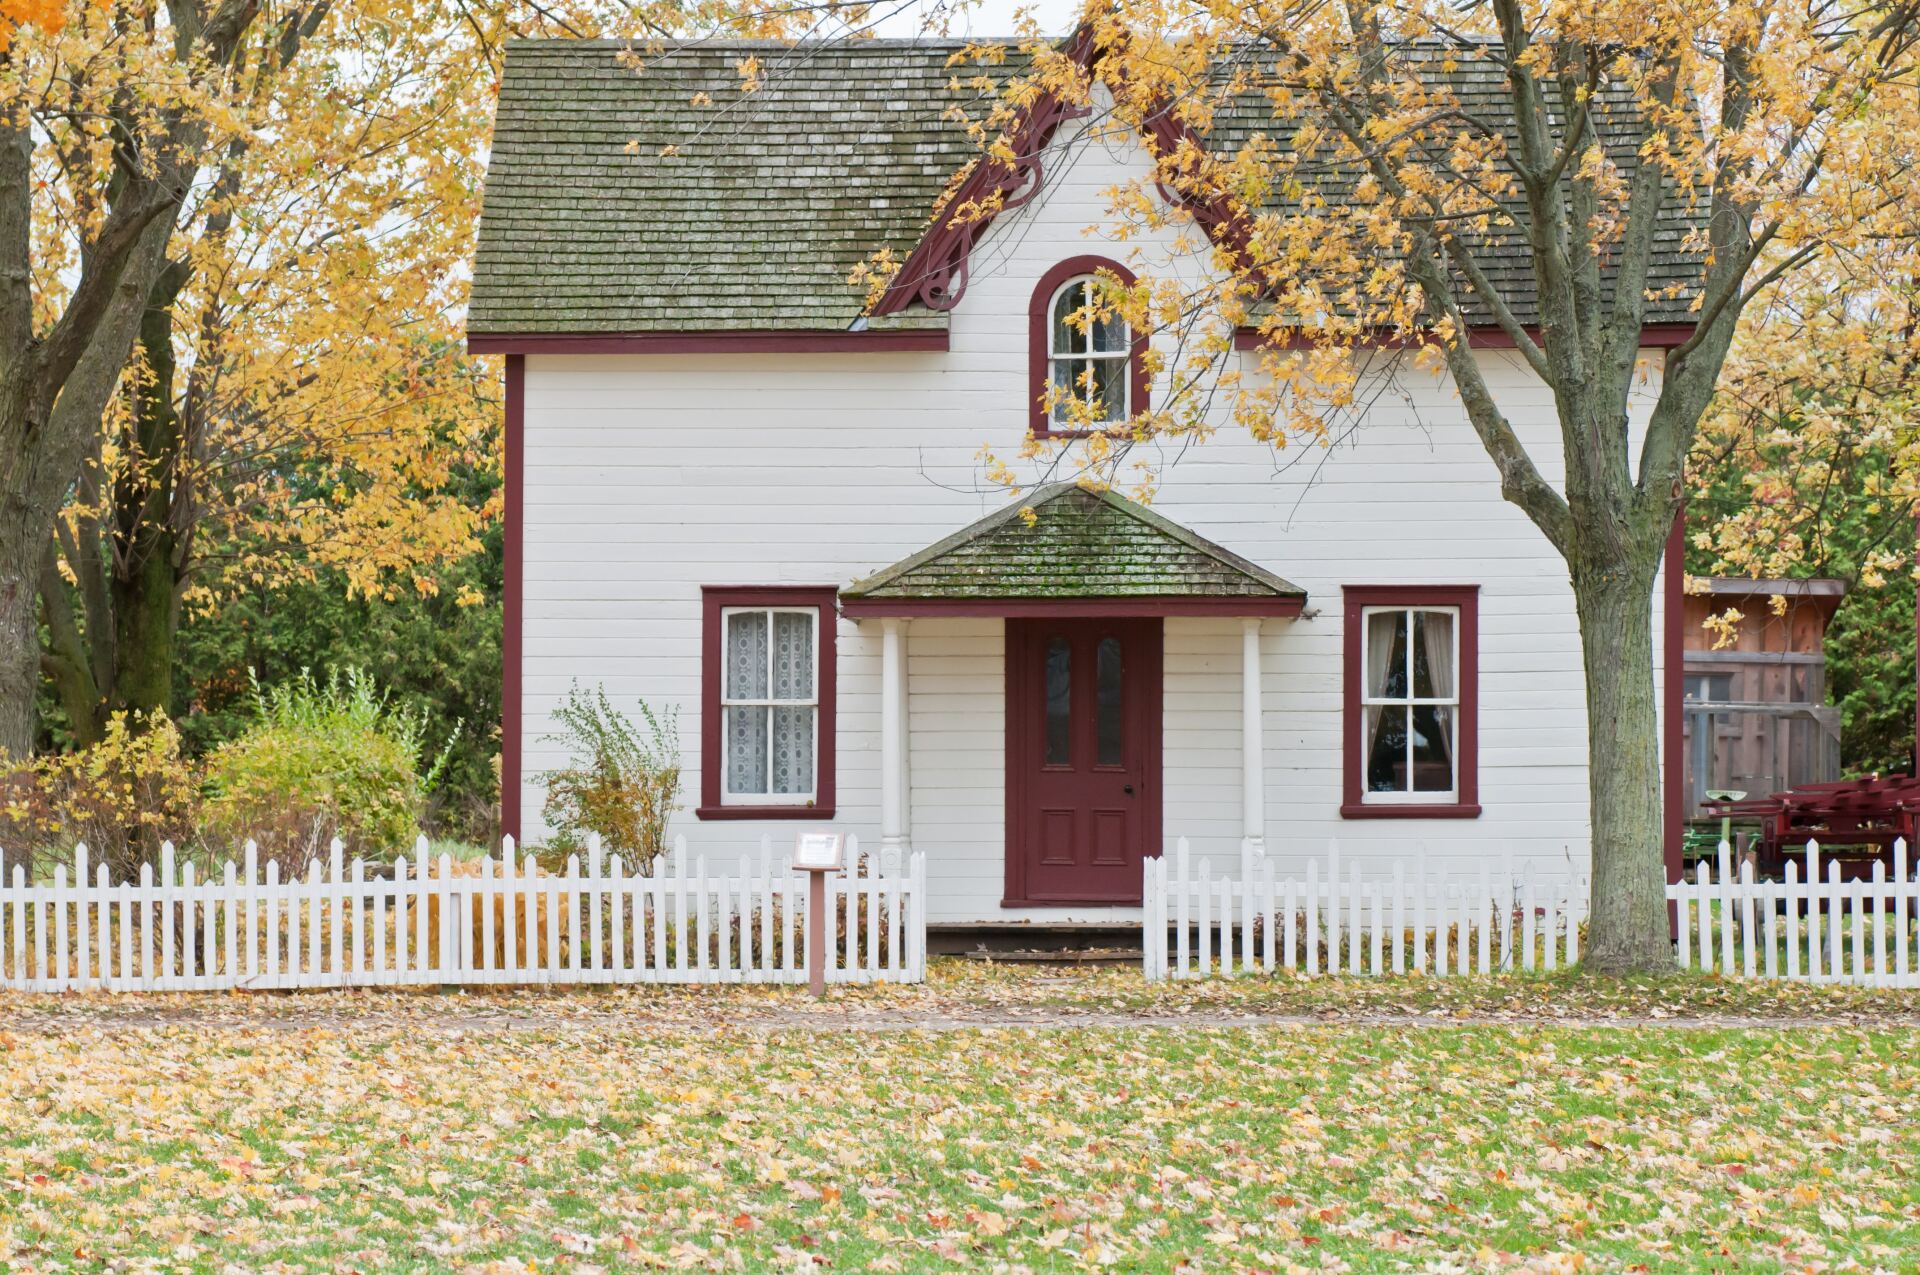 Selling Your Home to Cash Buyers in Any Season